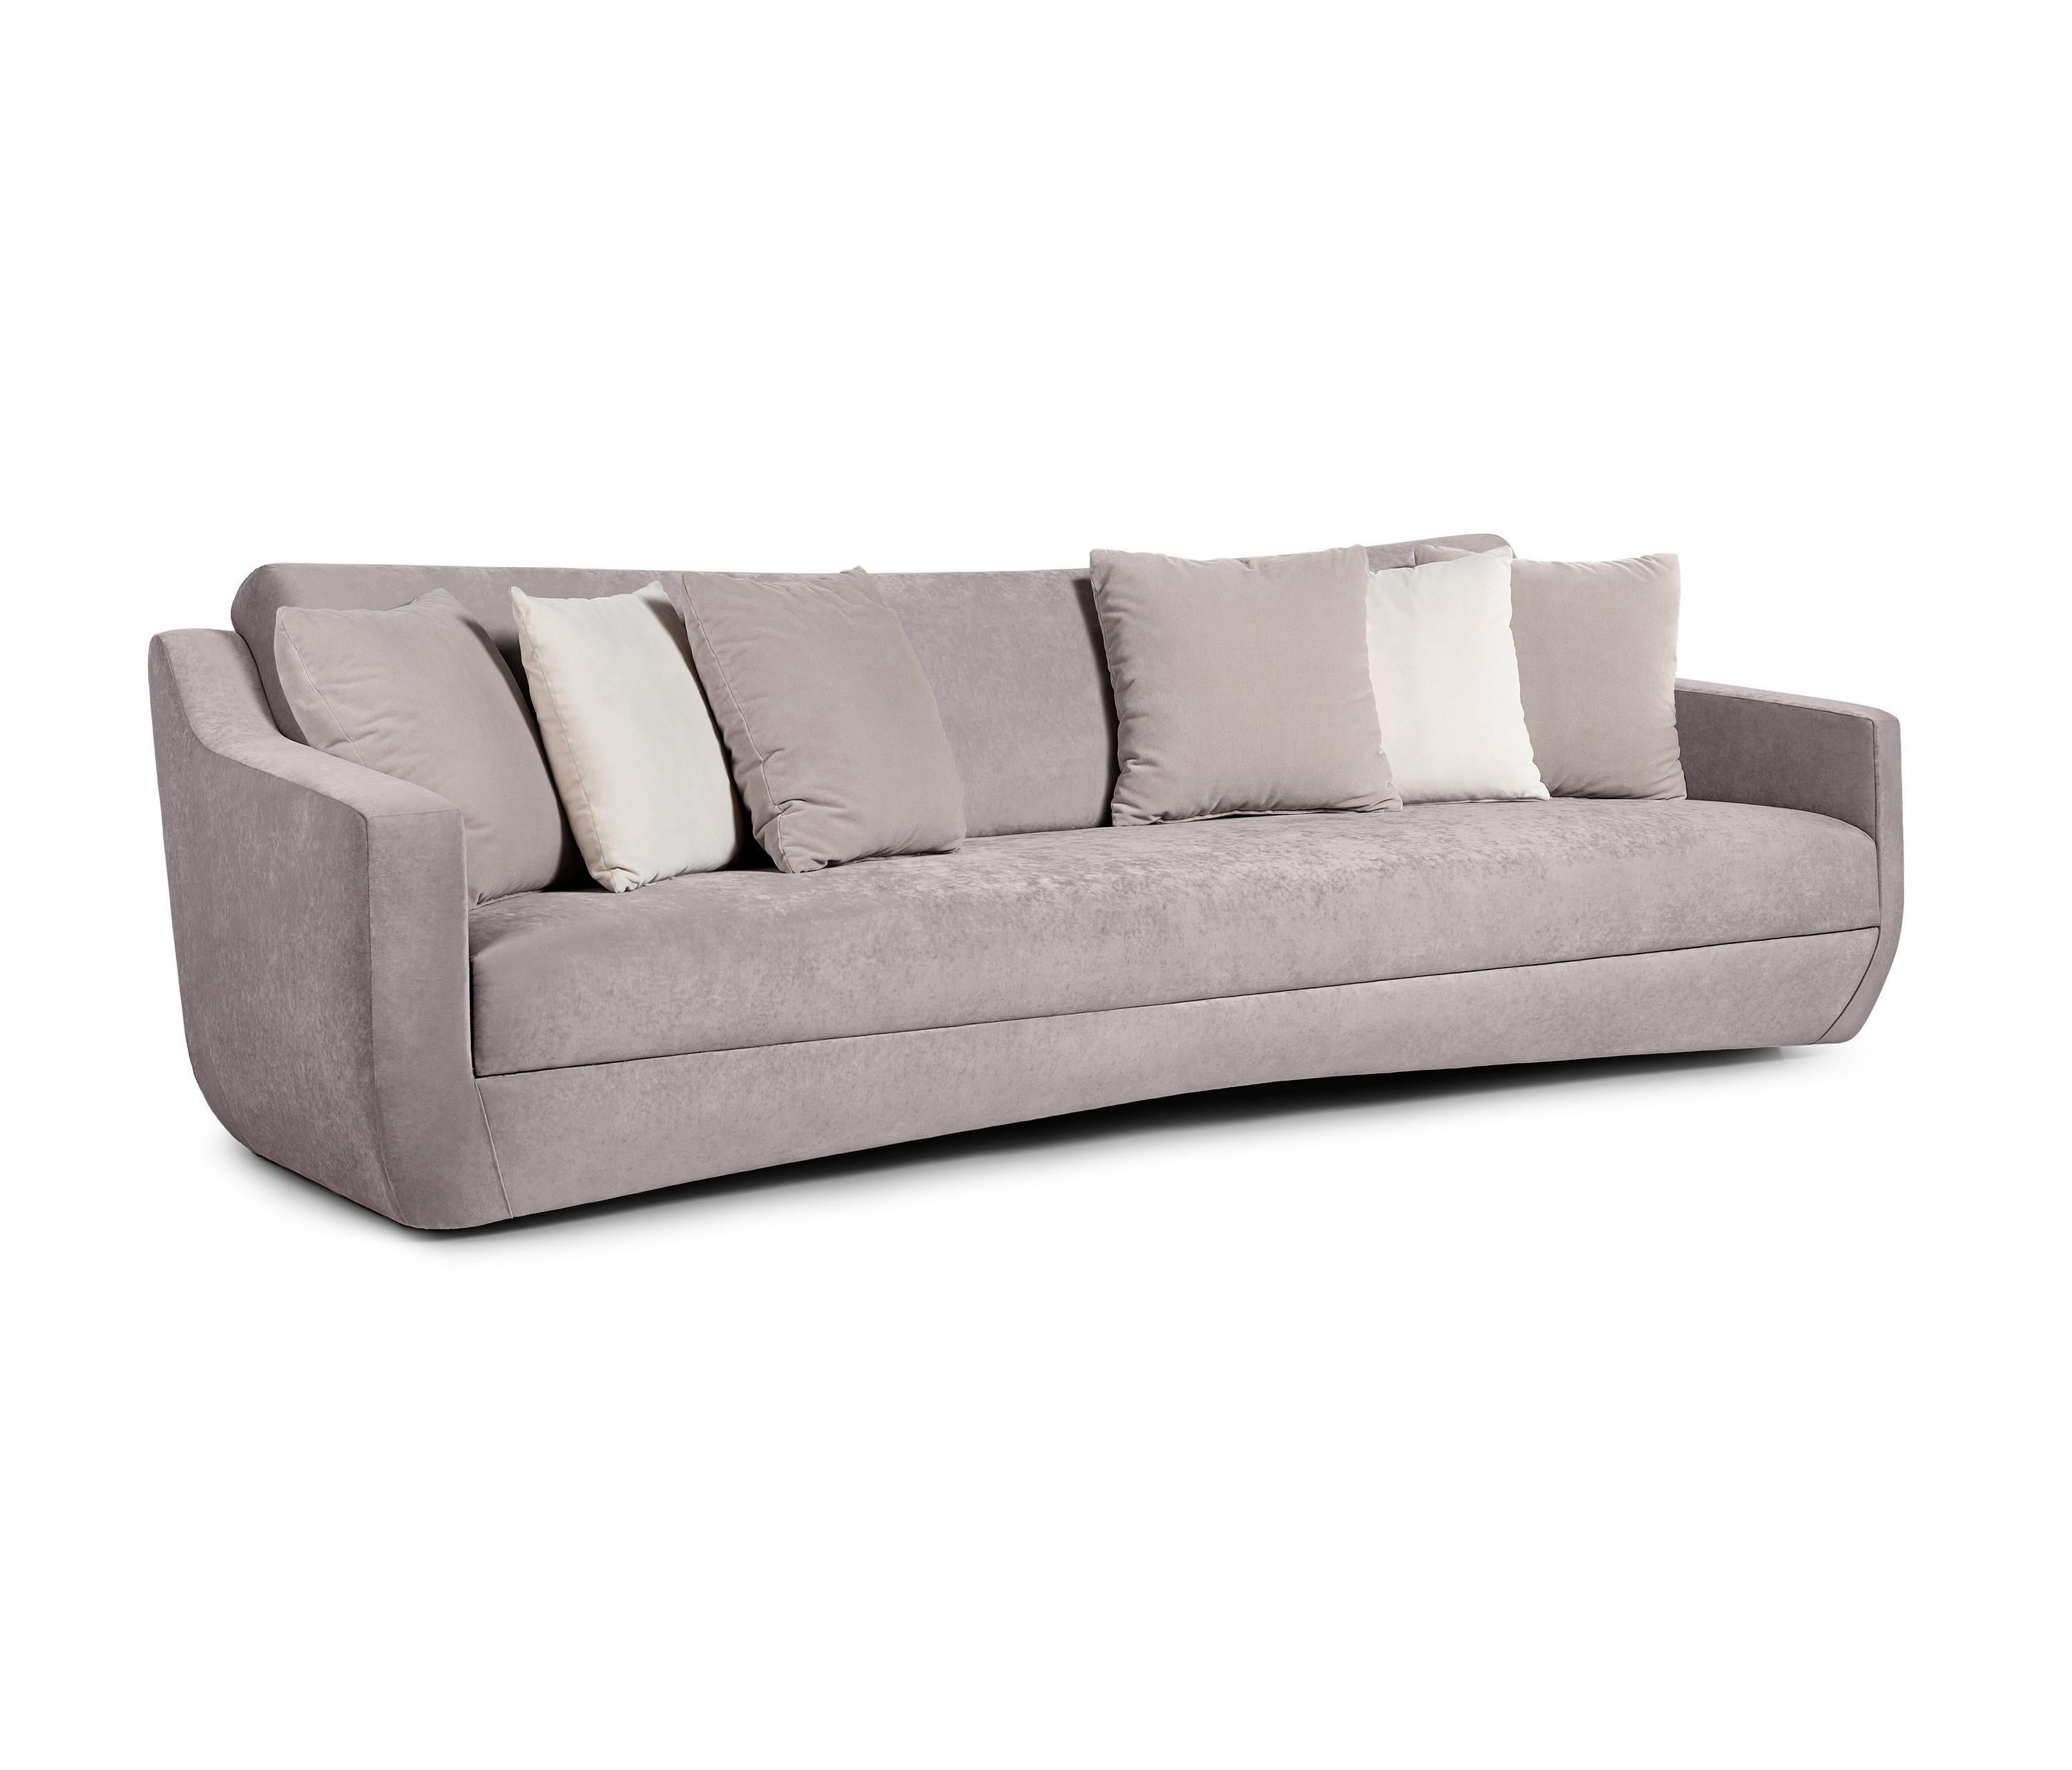 Contemporary Sculptural Sofa with Discreet Seaming For Sale 3